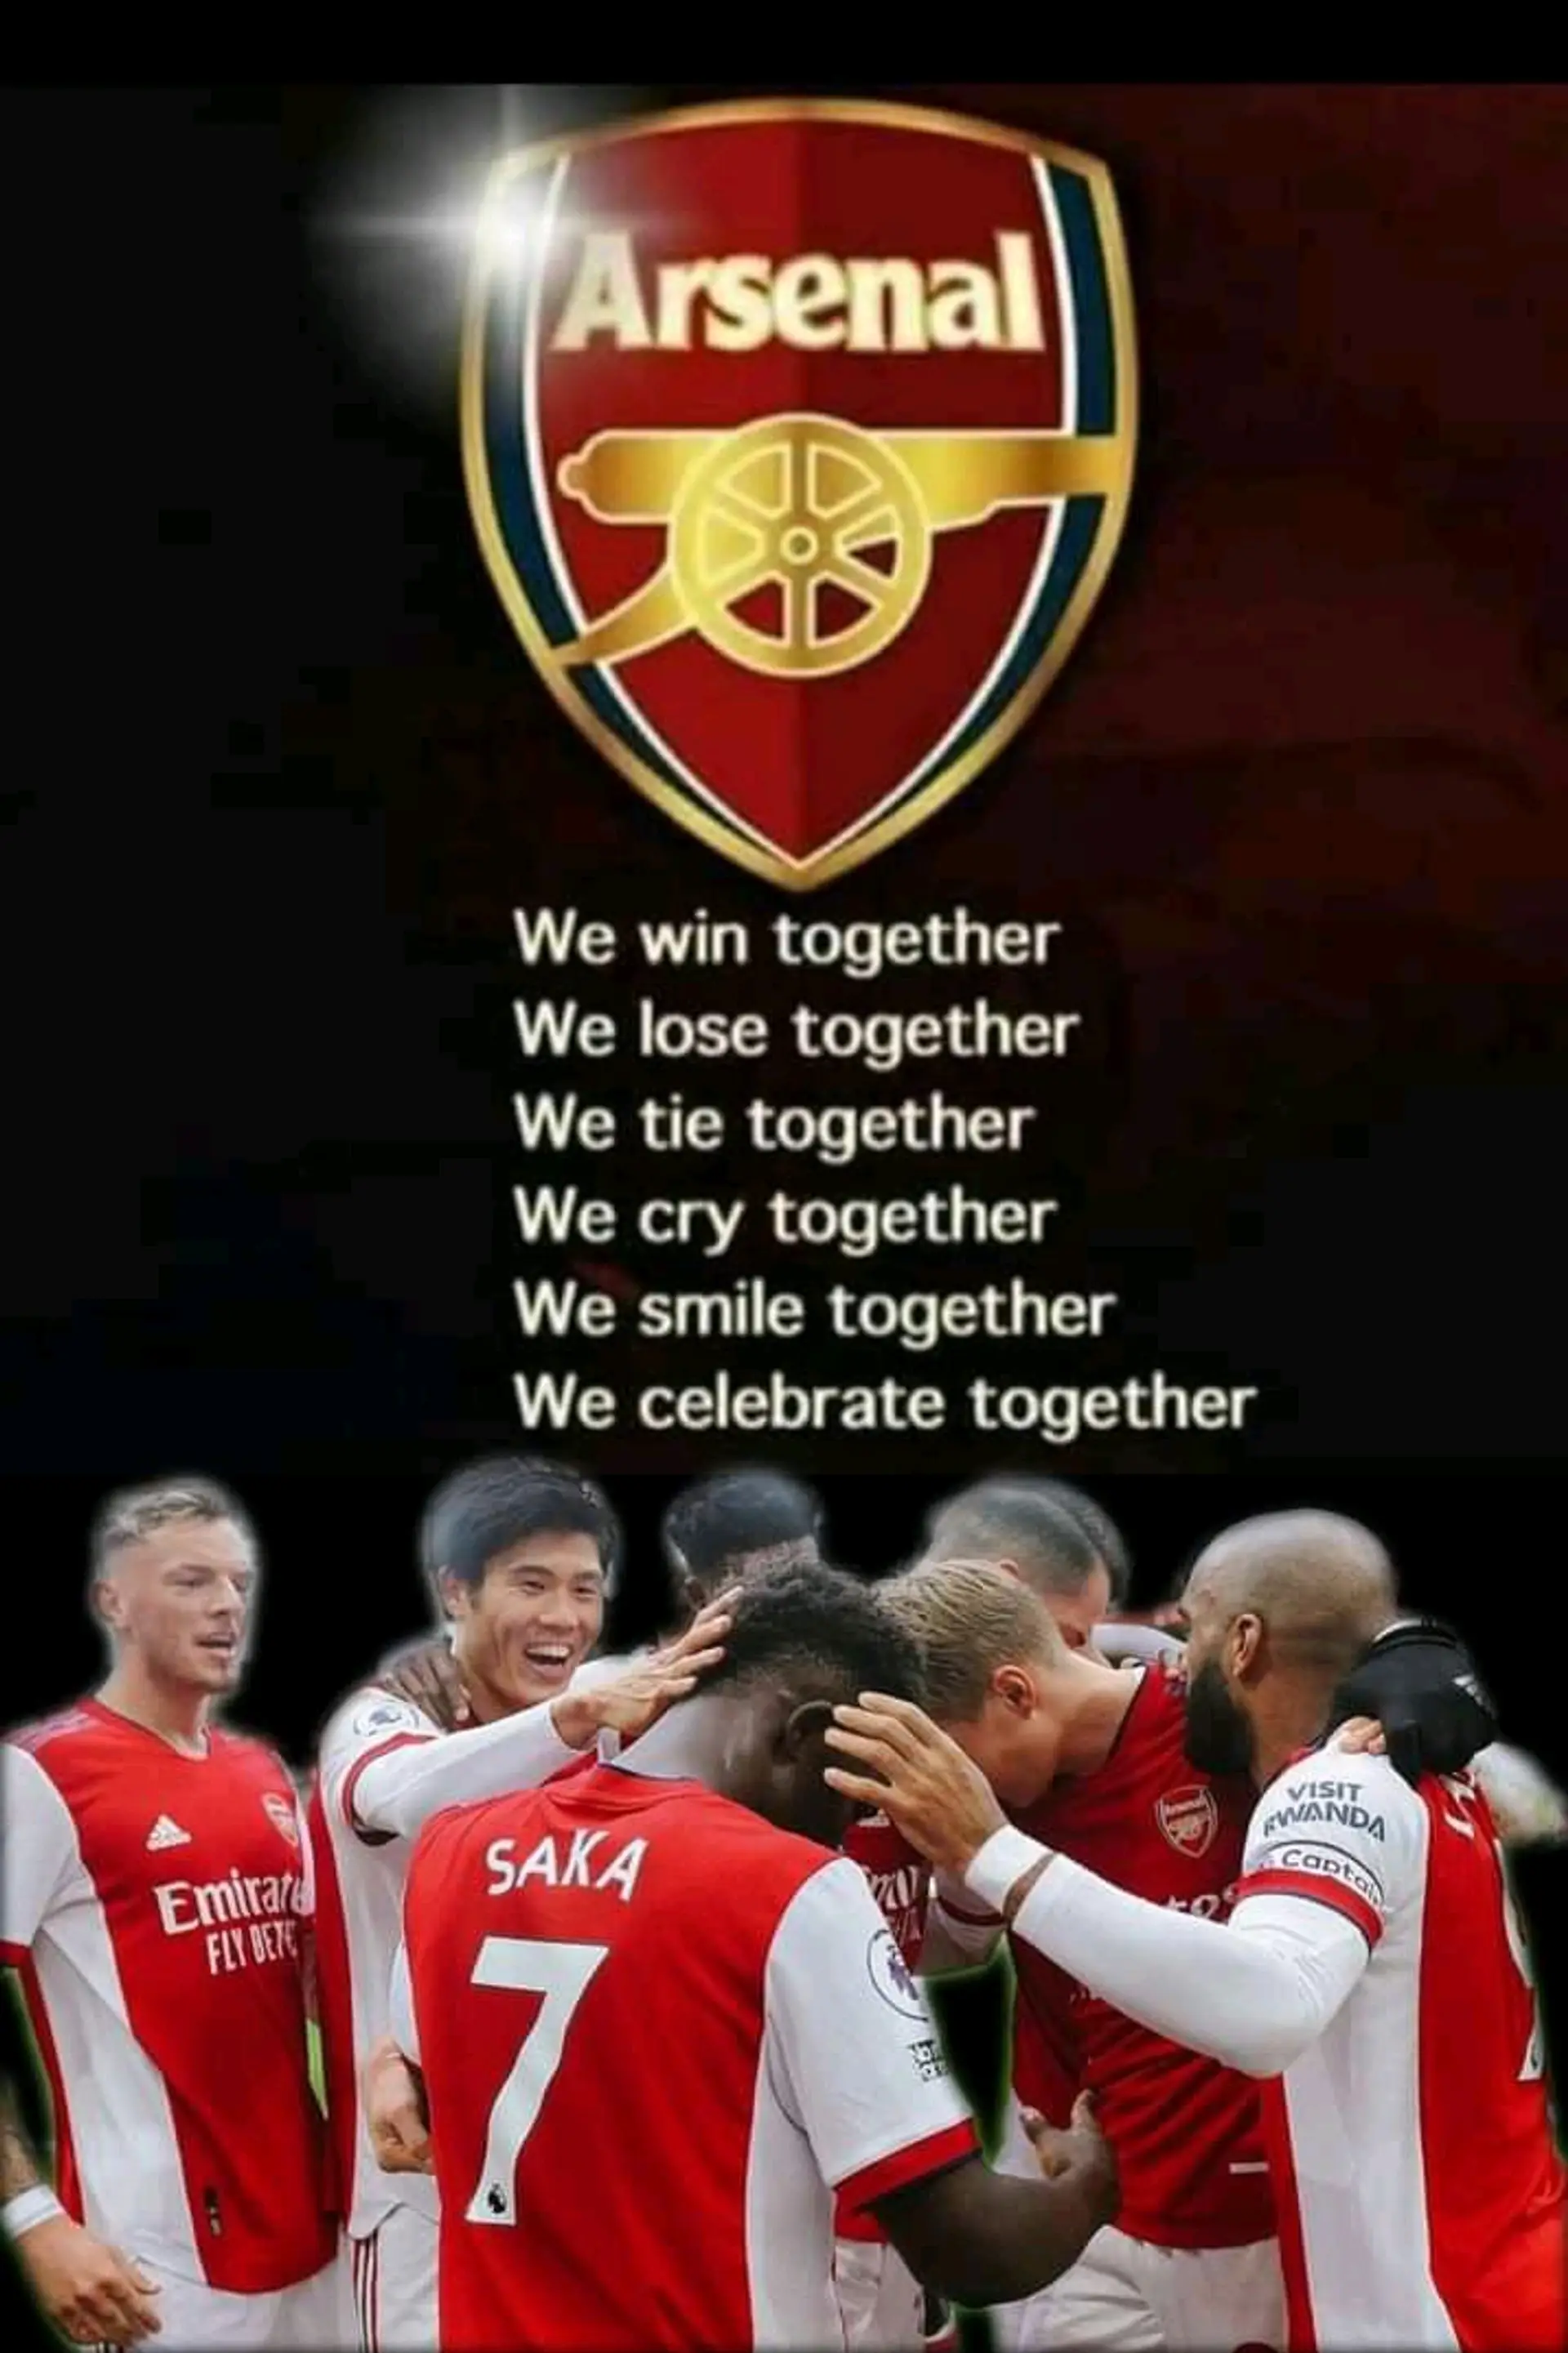 Arsenal Fans Stand Firm Win or Lose is Just About Game of Chance We Need To be Ok at Anything happen.